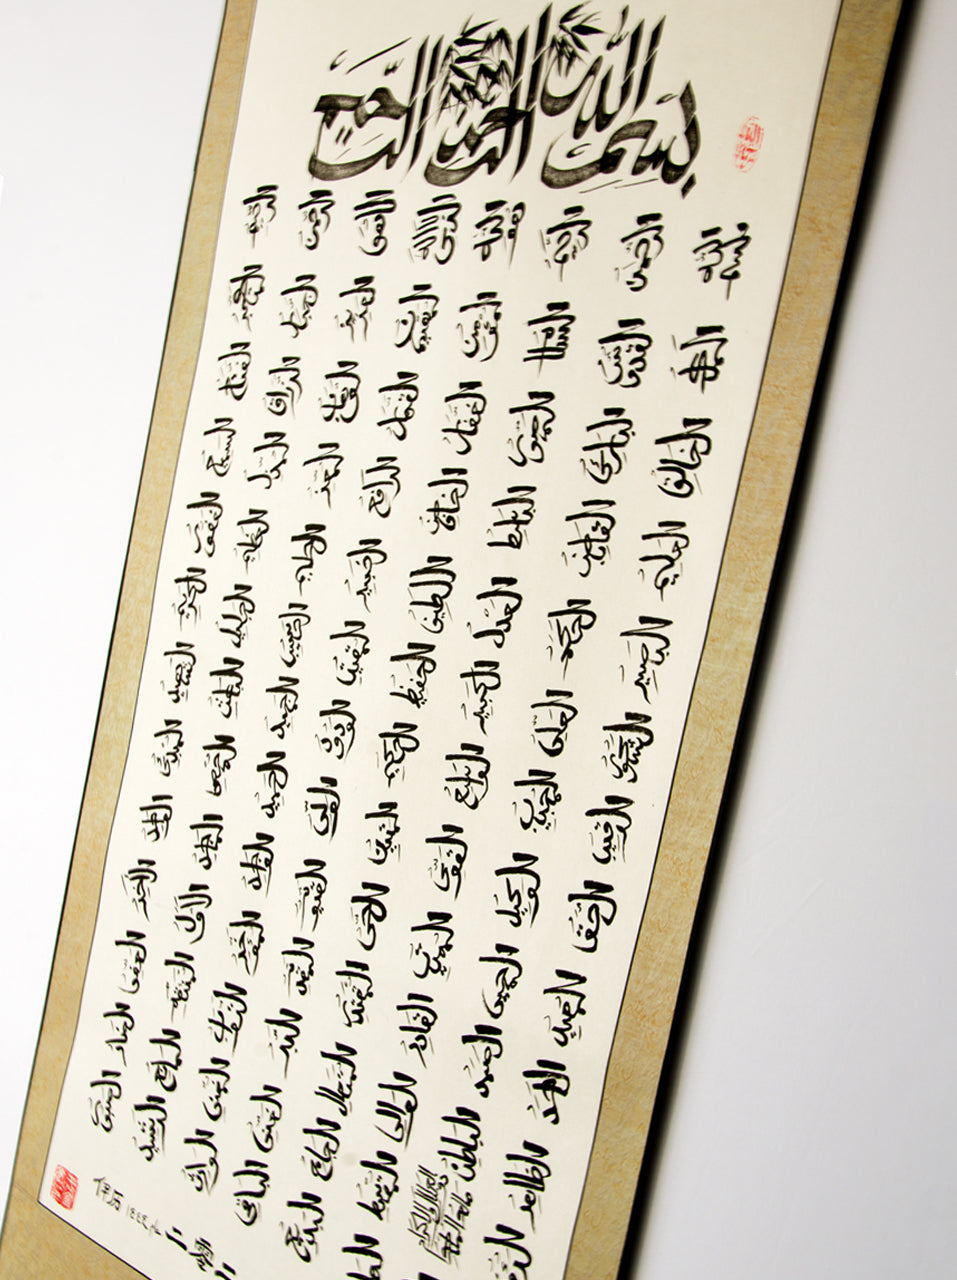 99 Names of Allah (Al Asma Ul Husna) Vertically Handwriting Authentic Chinese style Calligraphy Scroll Artworks